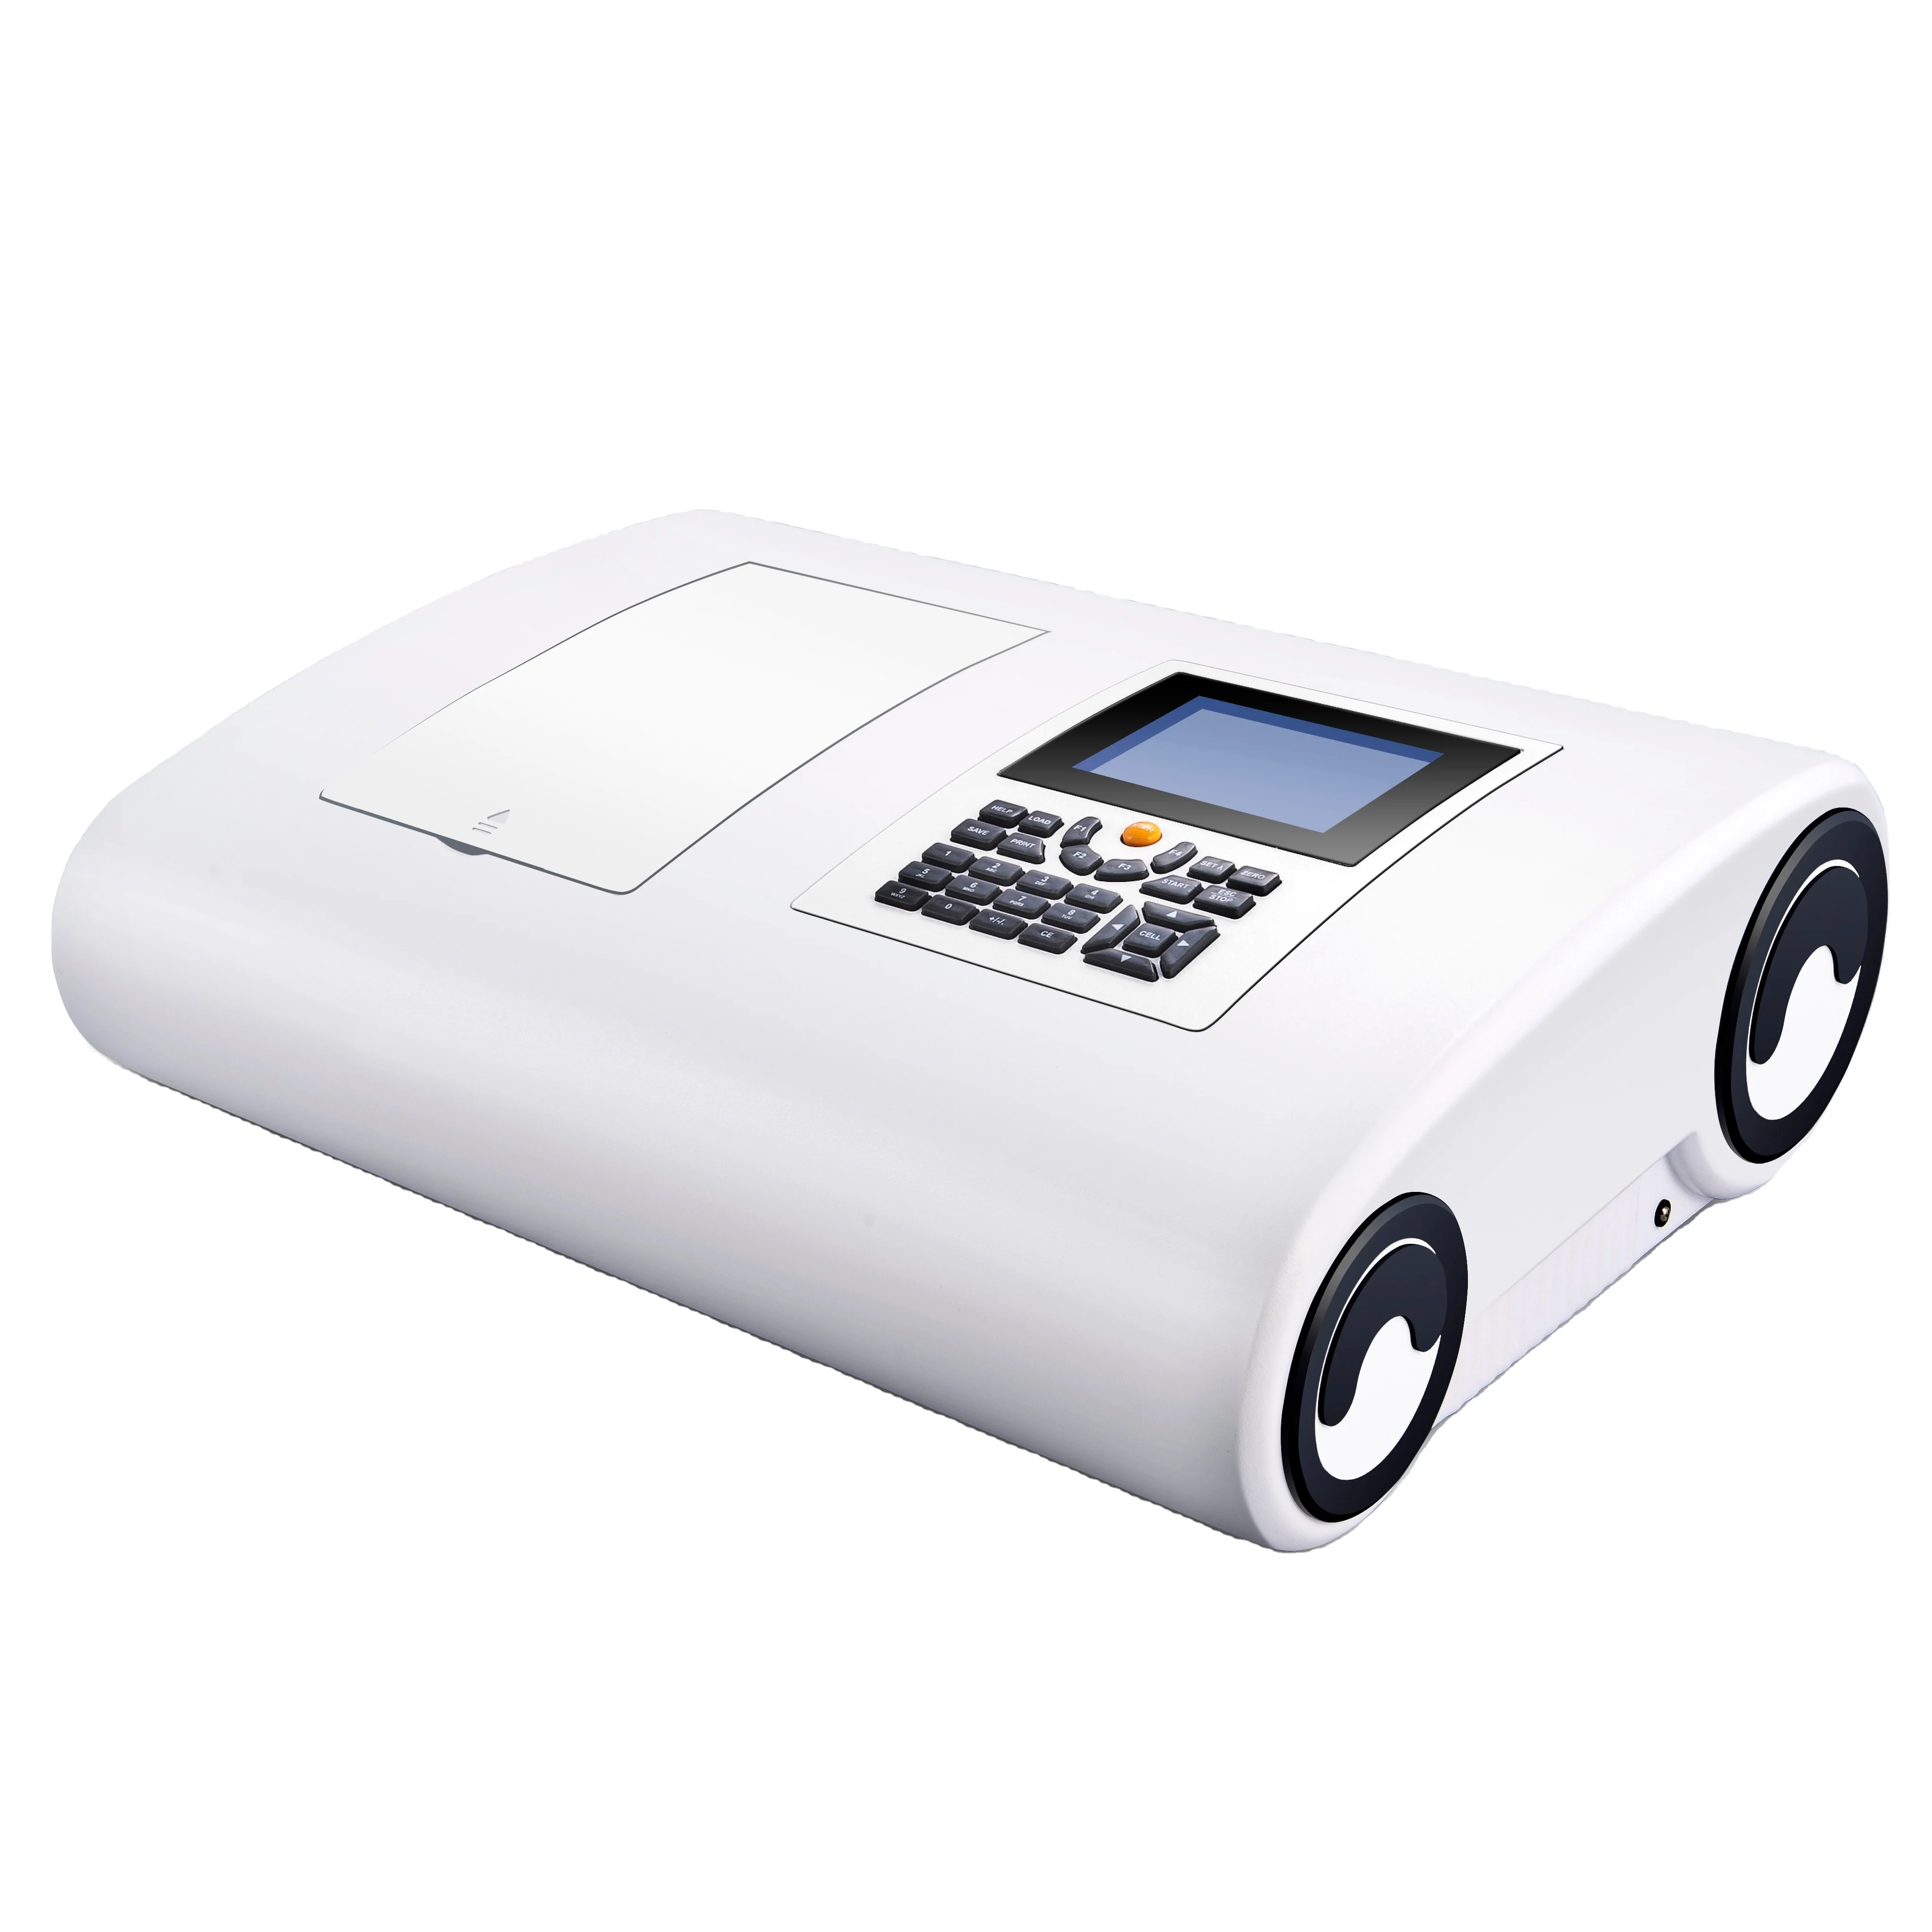 UV 9000 dual beam uv visible spectrophotometer with LCD screen